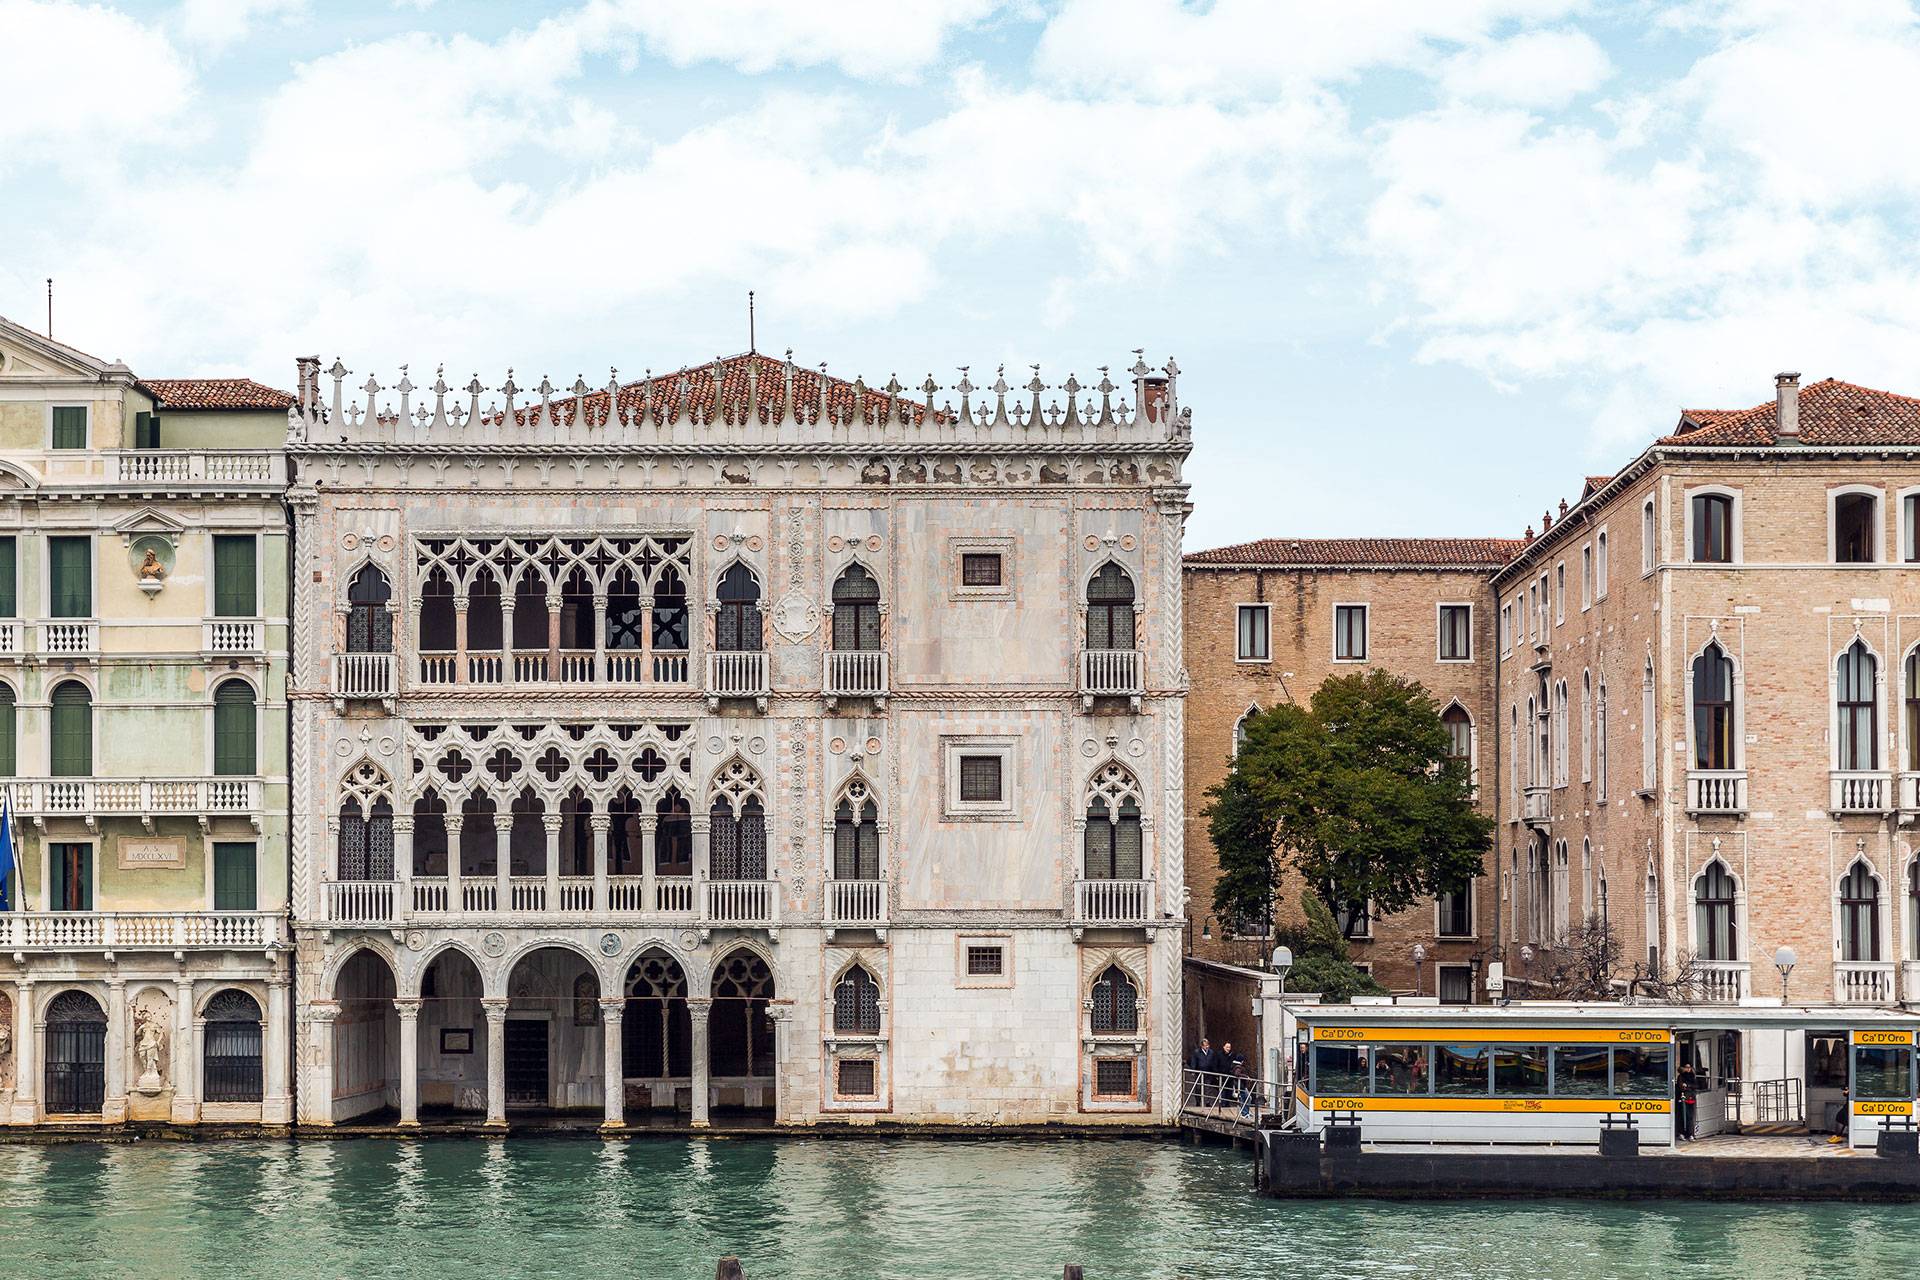 Cà d'Oro: the most beautiful Palazzo on the Grand Canal, just in front of you!